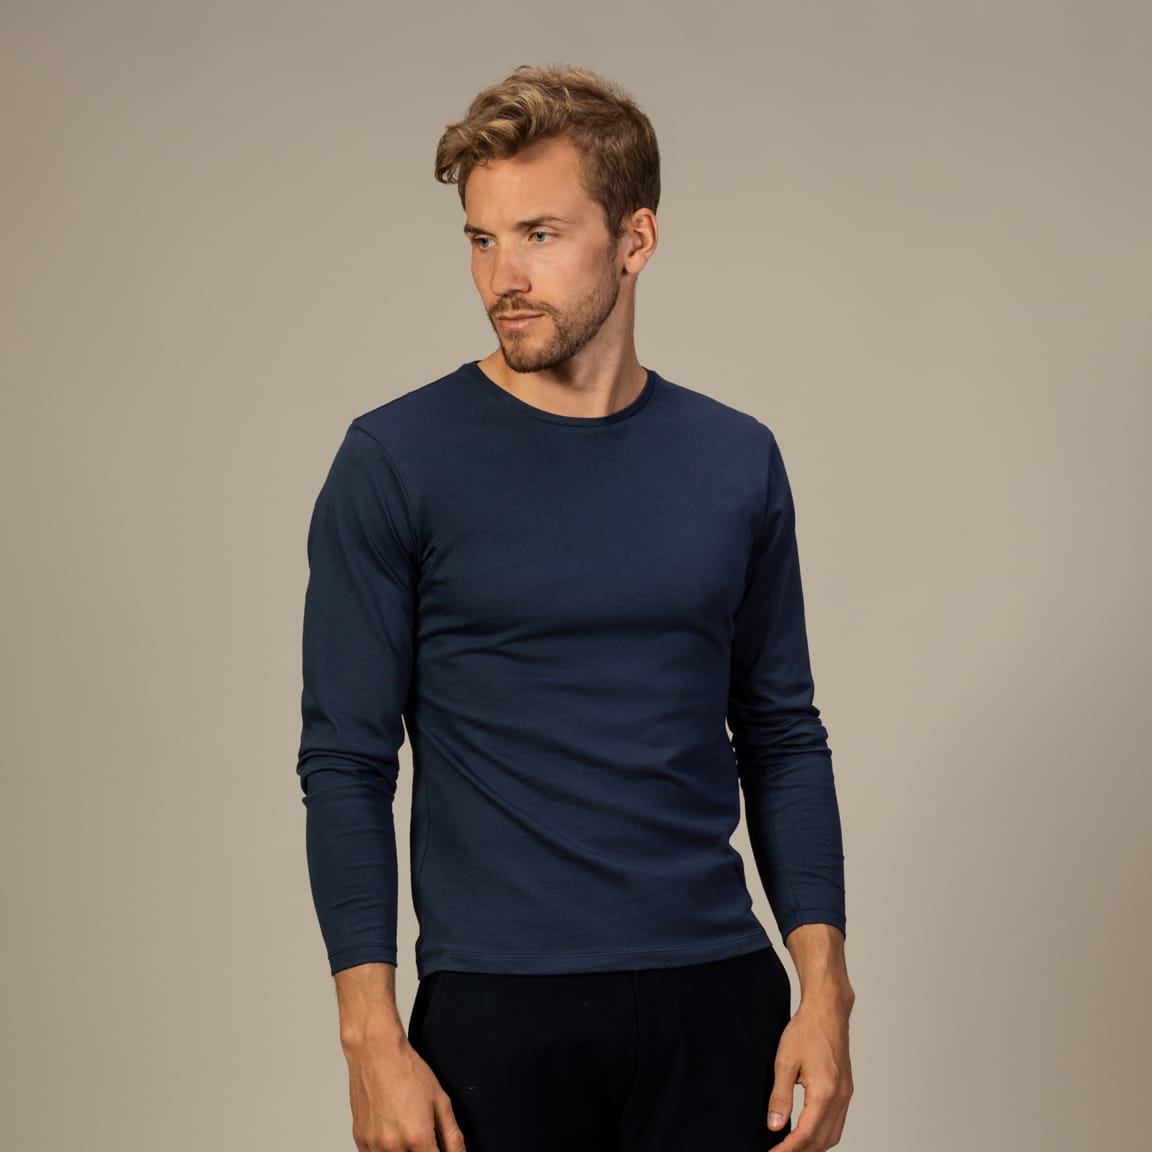 Tailor store long sleeve navy